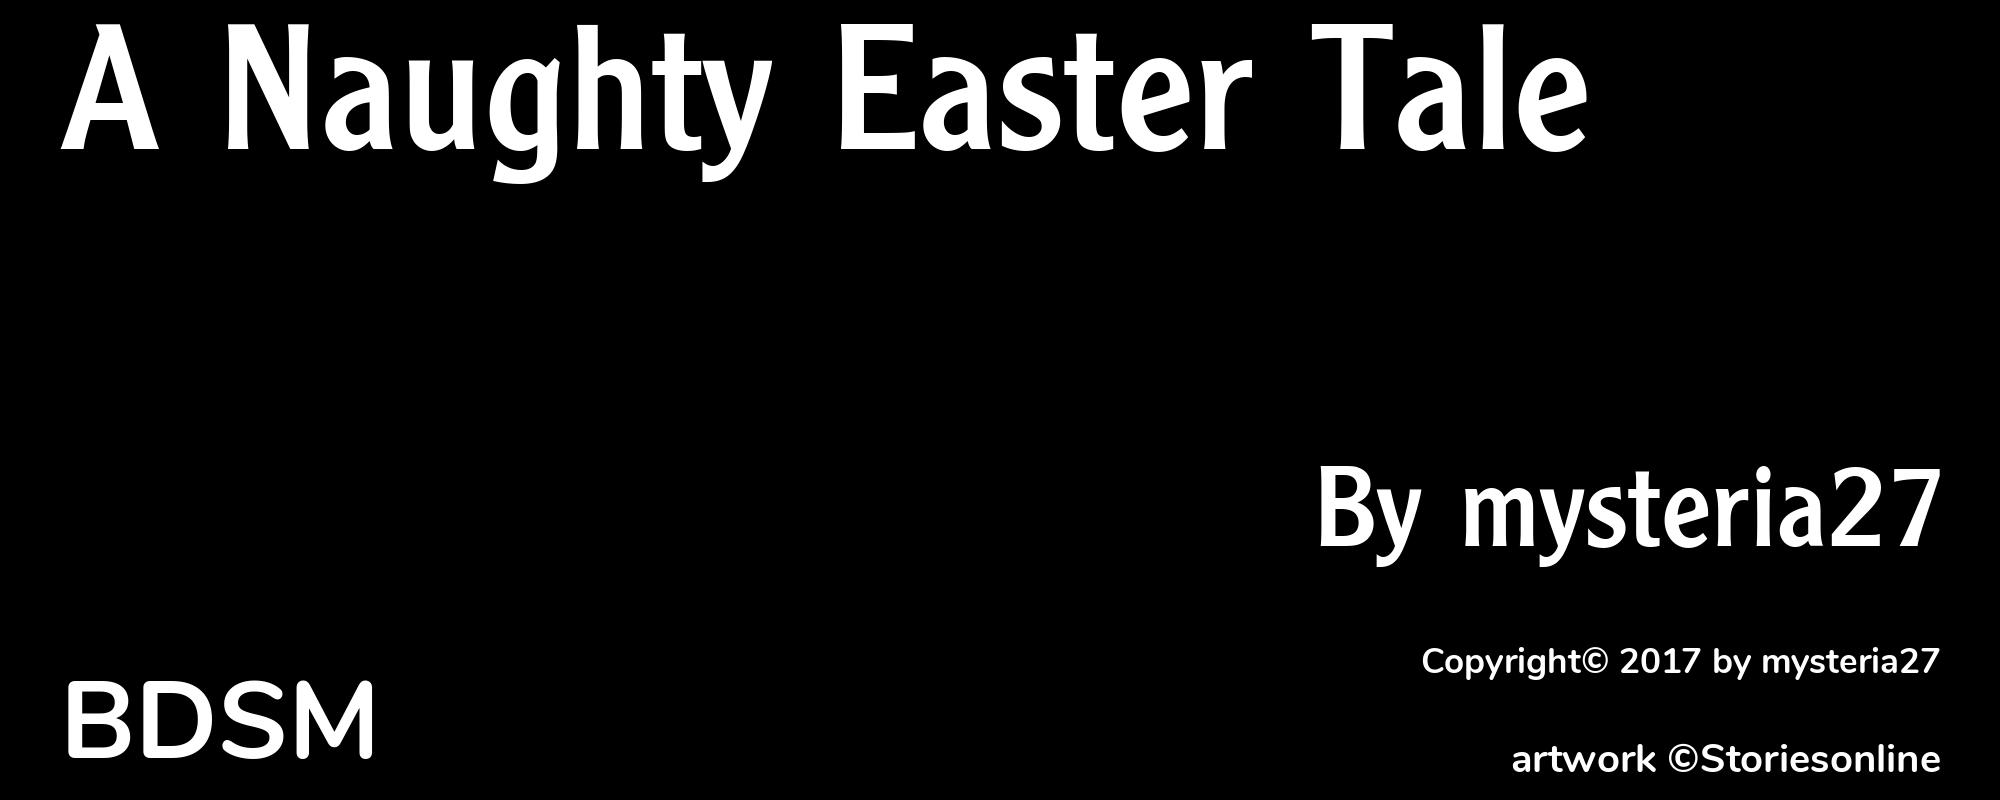 A Naughty Easter Tale - Cover